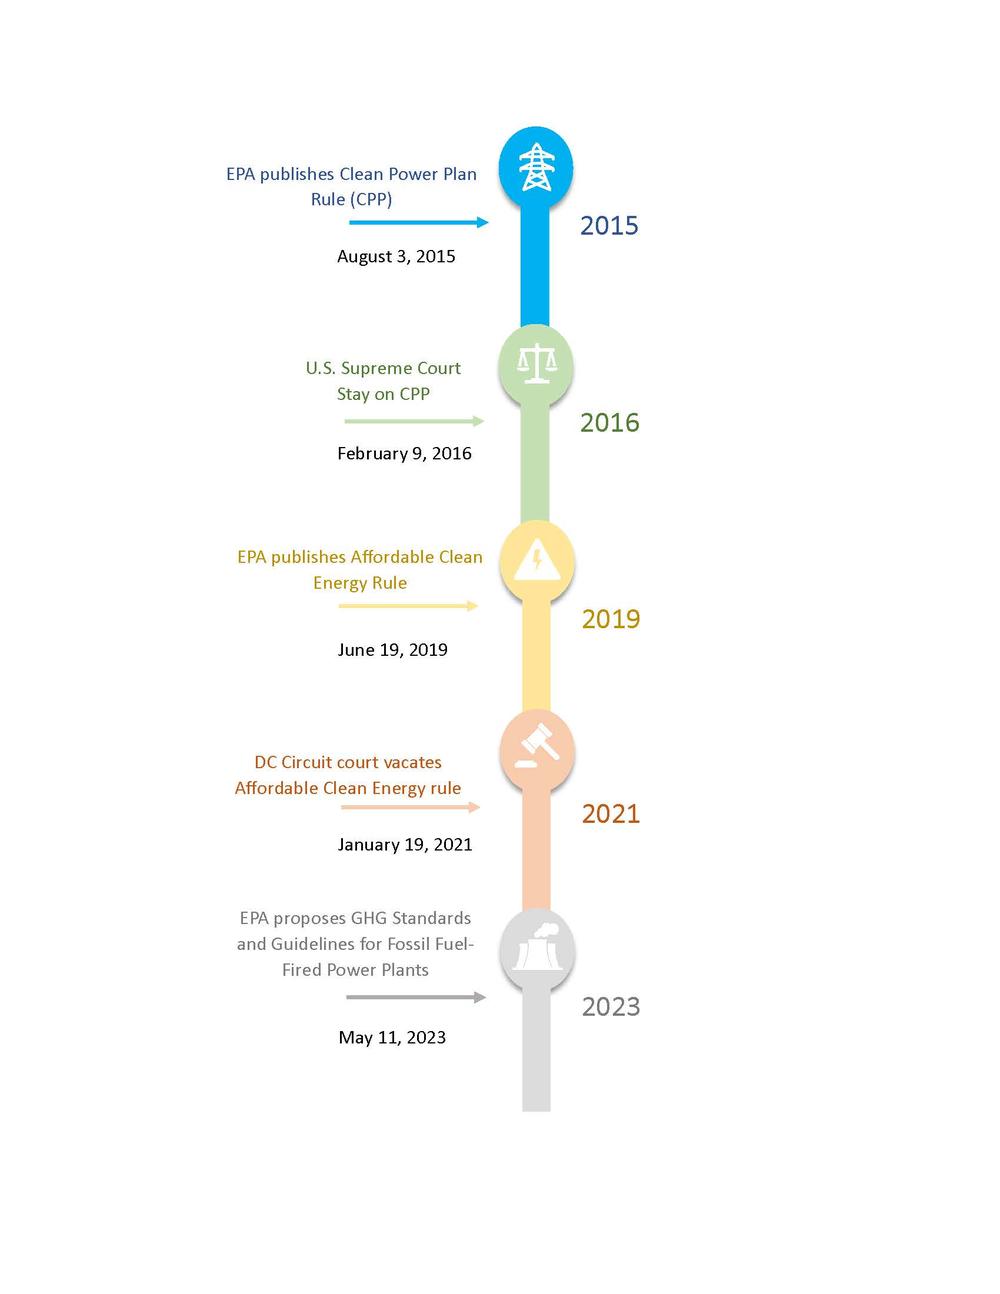 A timeline of Actions on Greenhouse Gas Regulations from 2015 to 2023